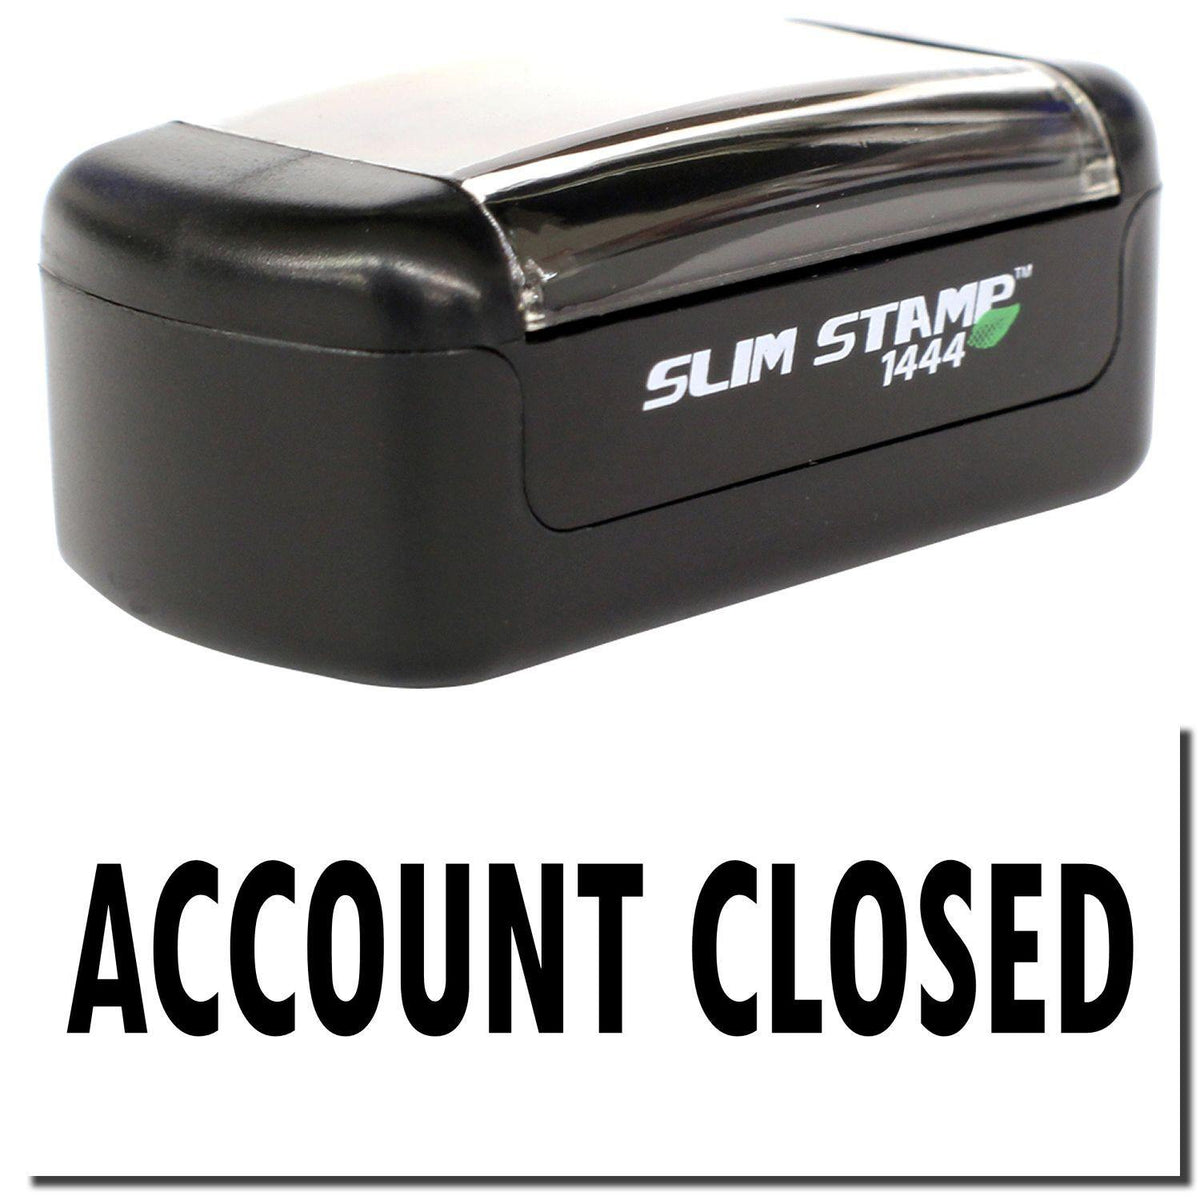 A stock office pre-inked stamp with a stamped image showing how the text &quot;ACCOUNT CLOSED&quot; is displayed after stamping.